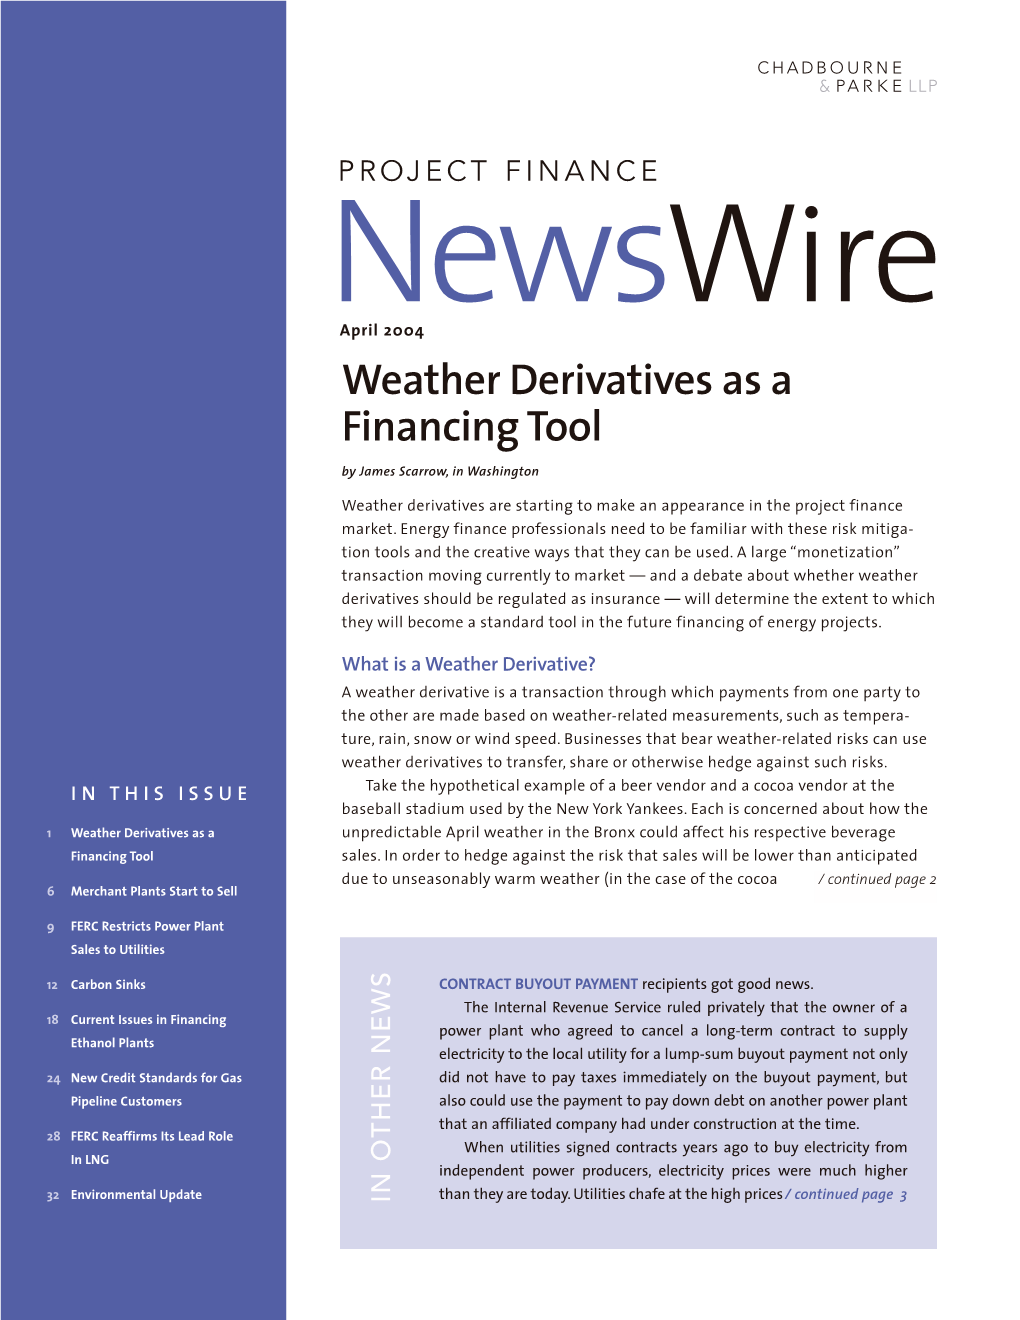 Weather Derivatives As a Financing Tool